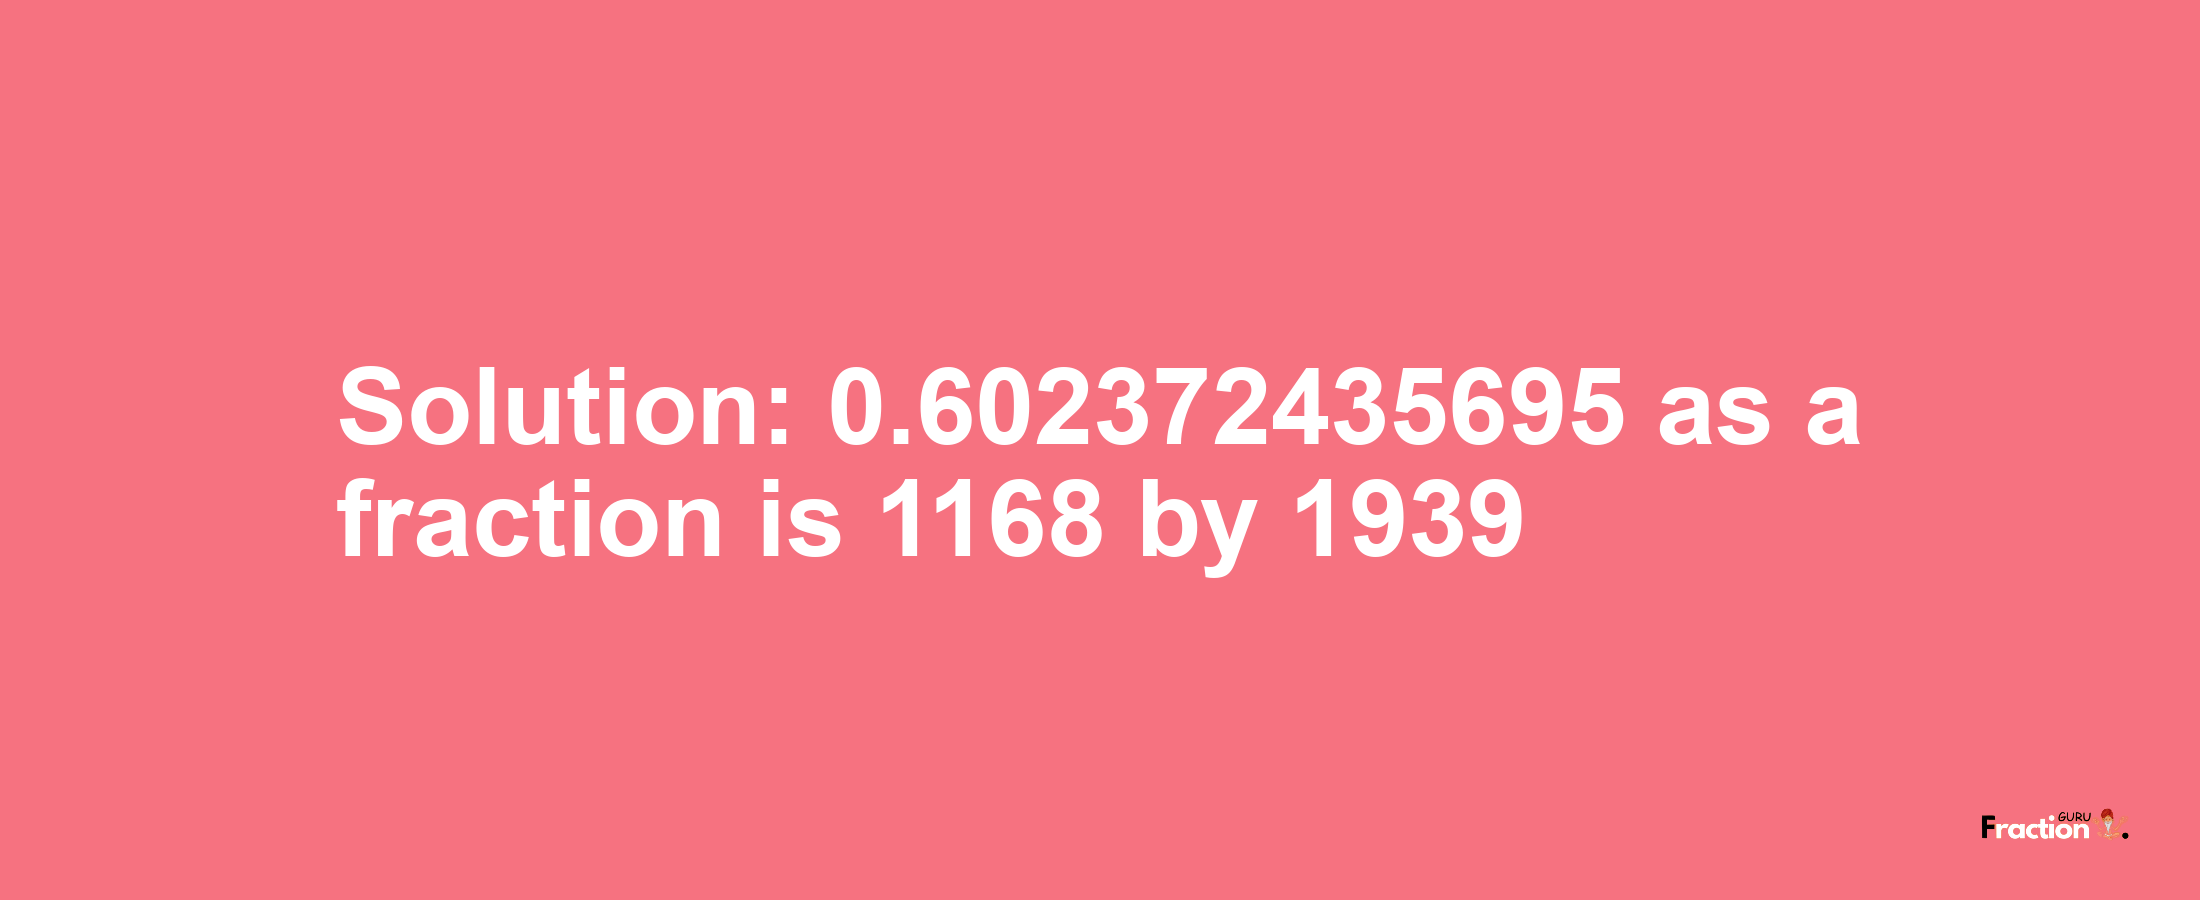 Solution:0.602372435695 as a fraction is 1168/1939